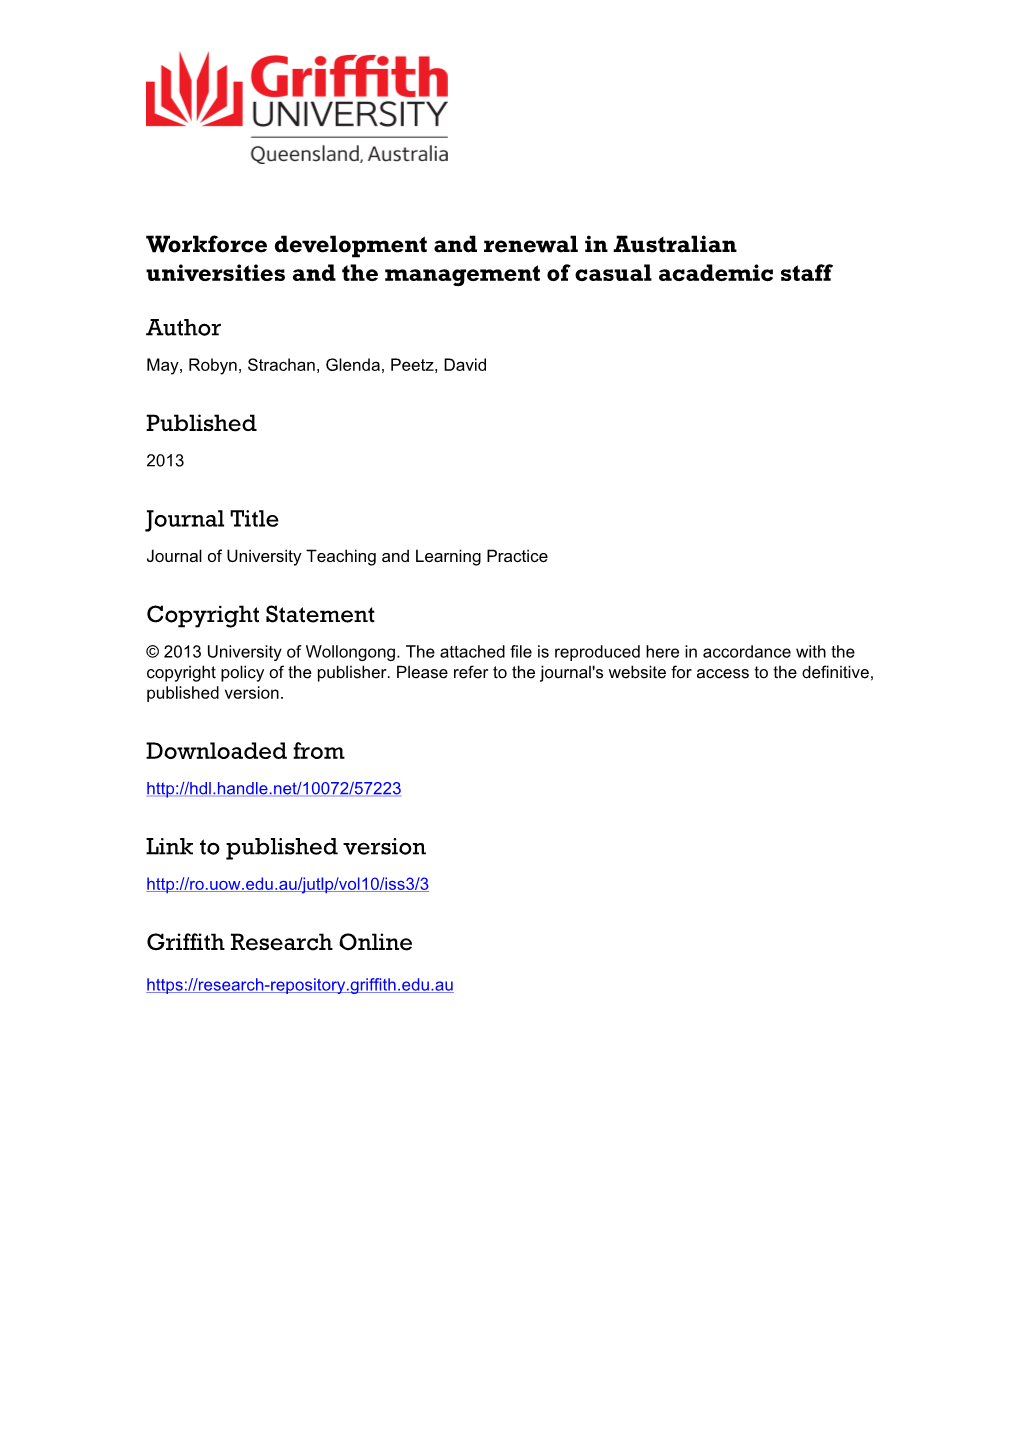 Workforce Development and Renewal in Australian Universities and the Management of Casual Academic Staff